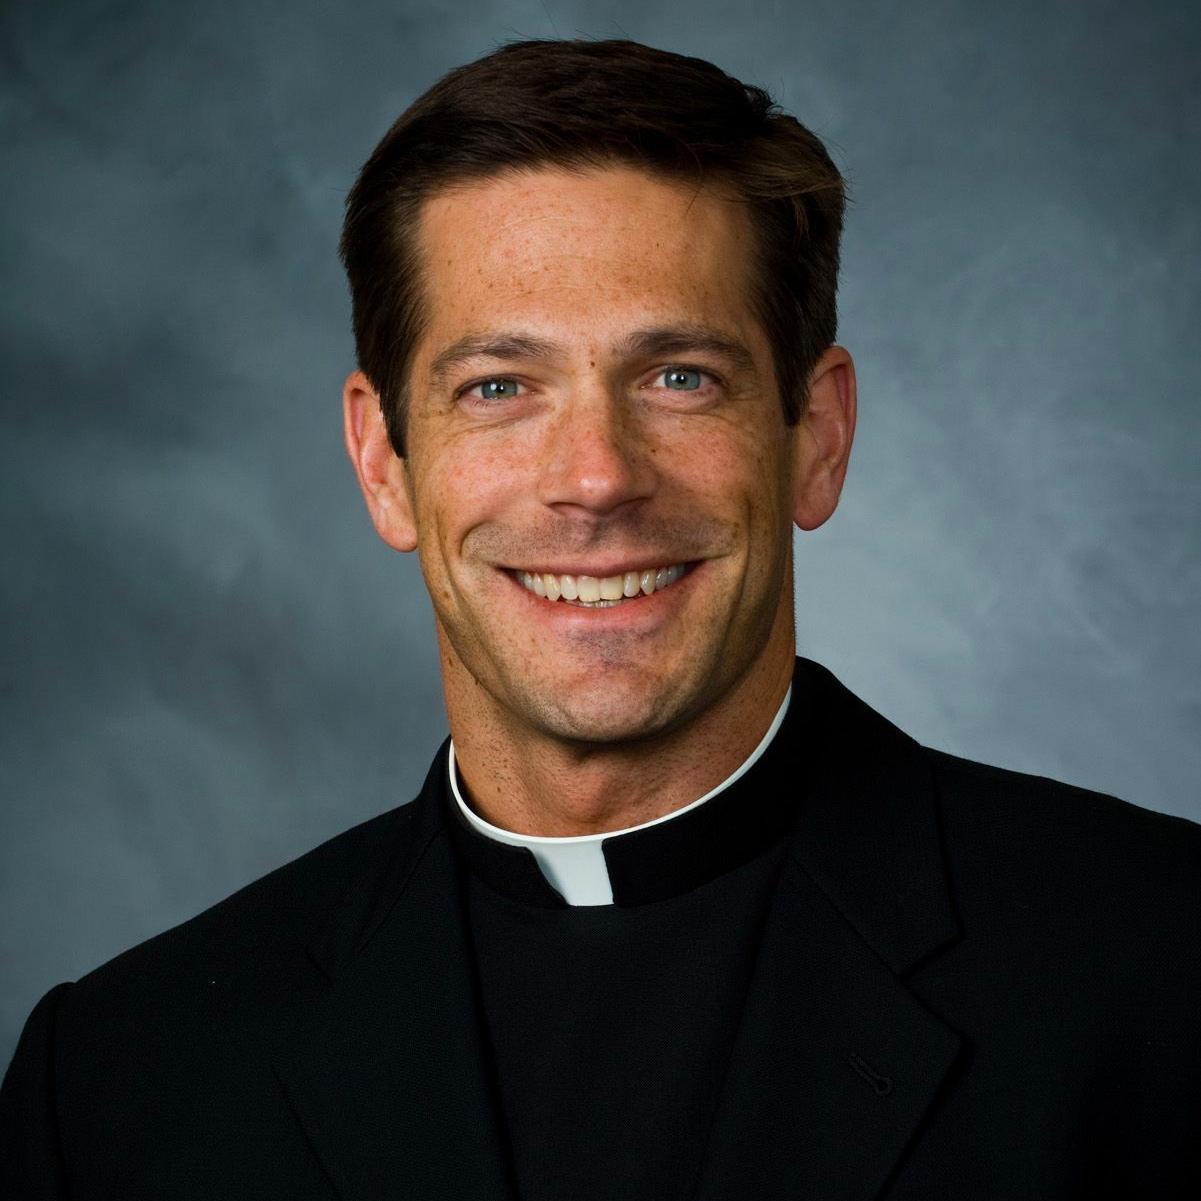 Is Father Mike Schmitz a Catholic priest?